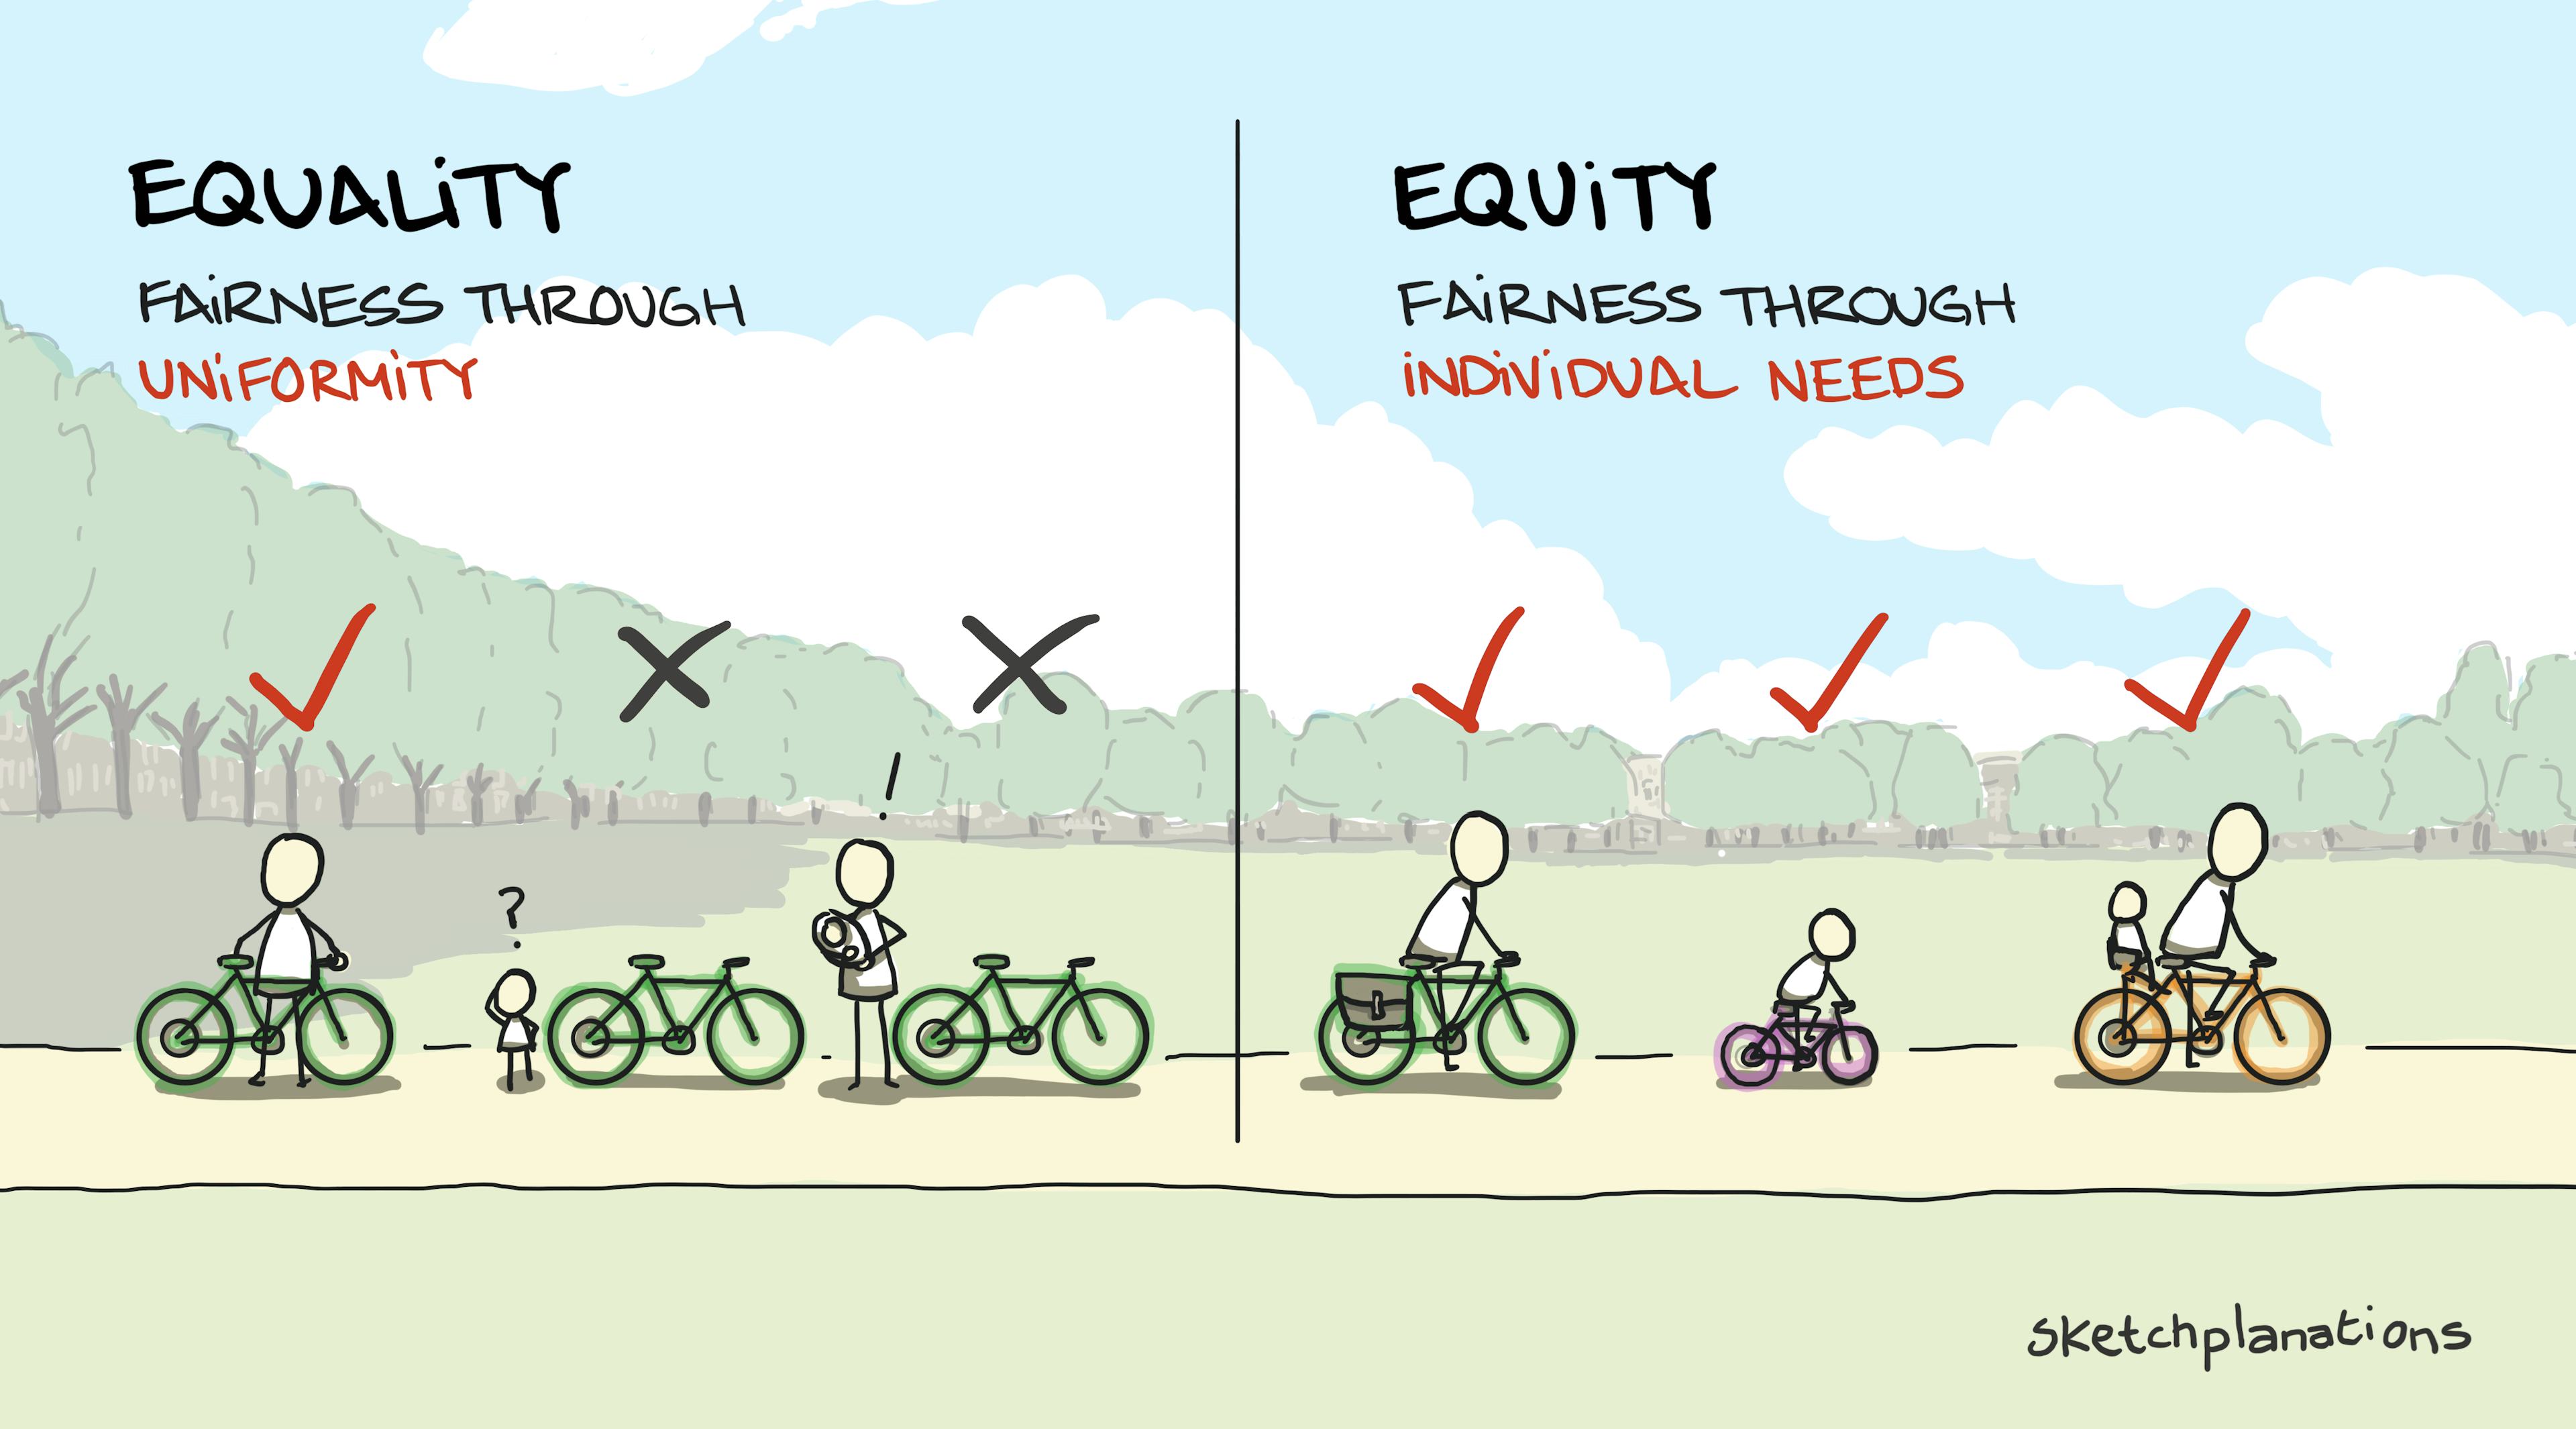 Equality equity difference illustration: showing 3 of the same bikes that fit just one adult as equality vs 3 differently-sized and equipped bikes to fit an adult, a child, and an adult with a baby